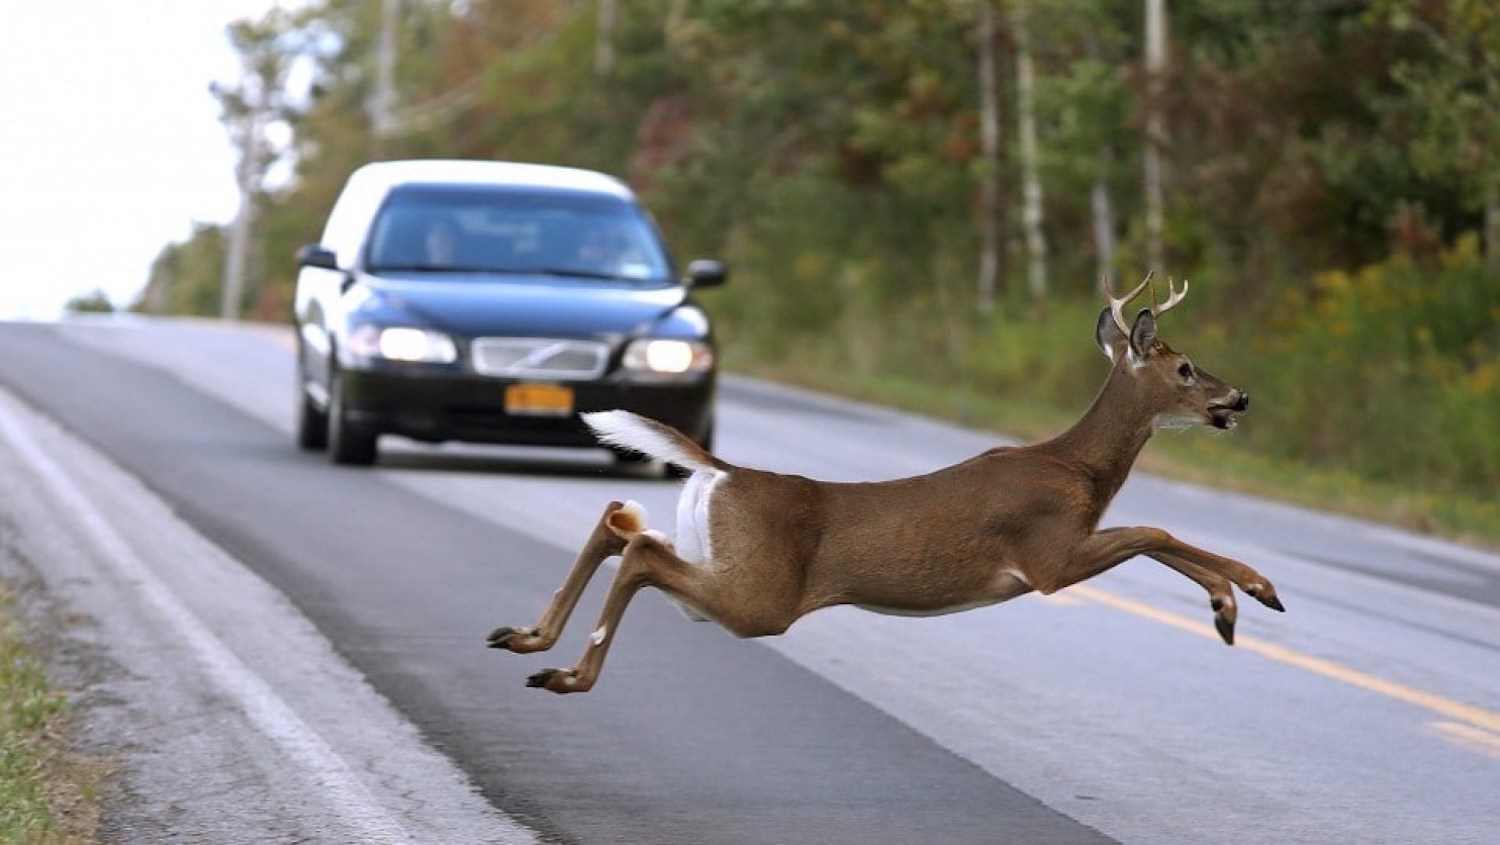 How Effective Are Deer Whistles to Avoid Vehicle Collisions?